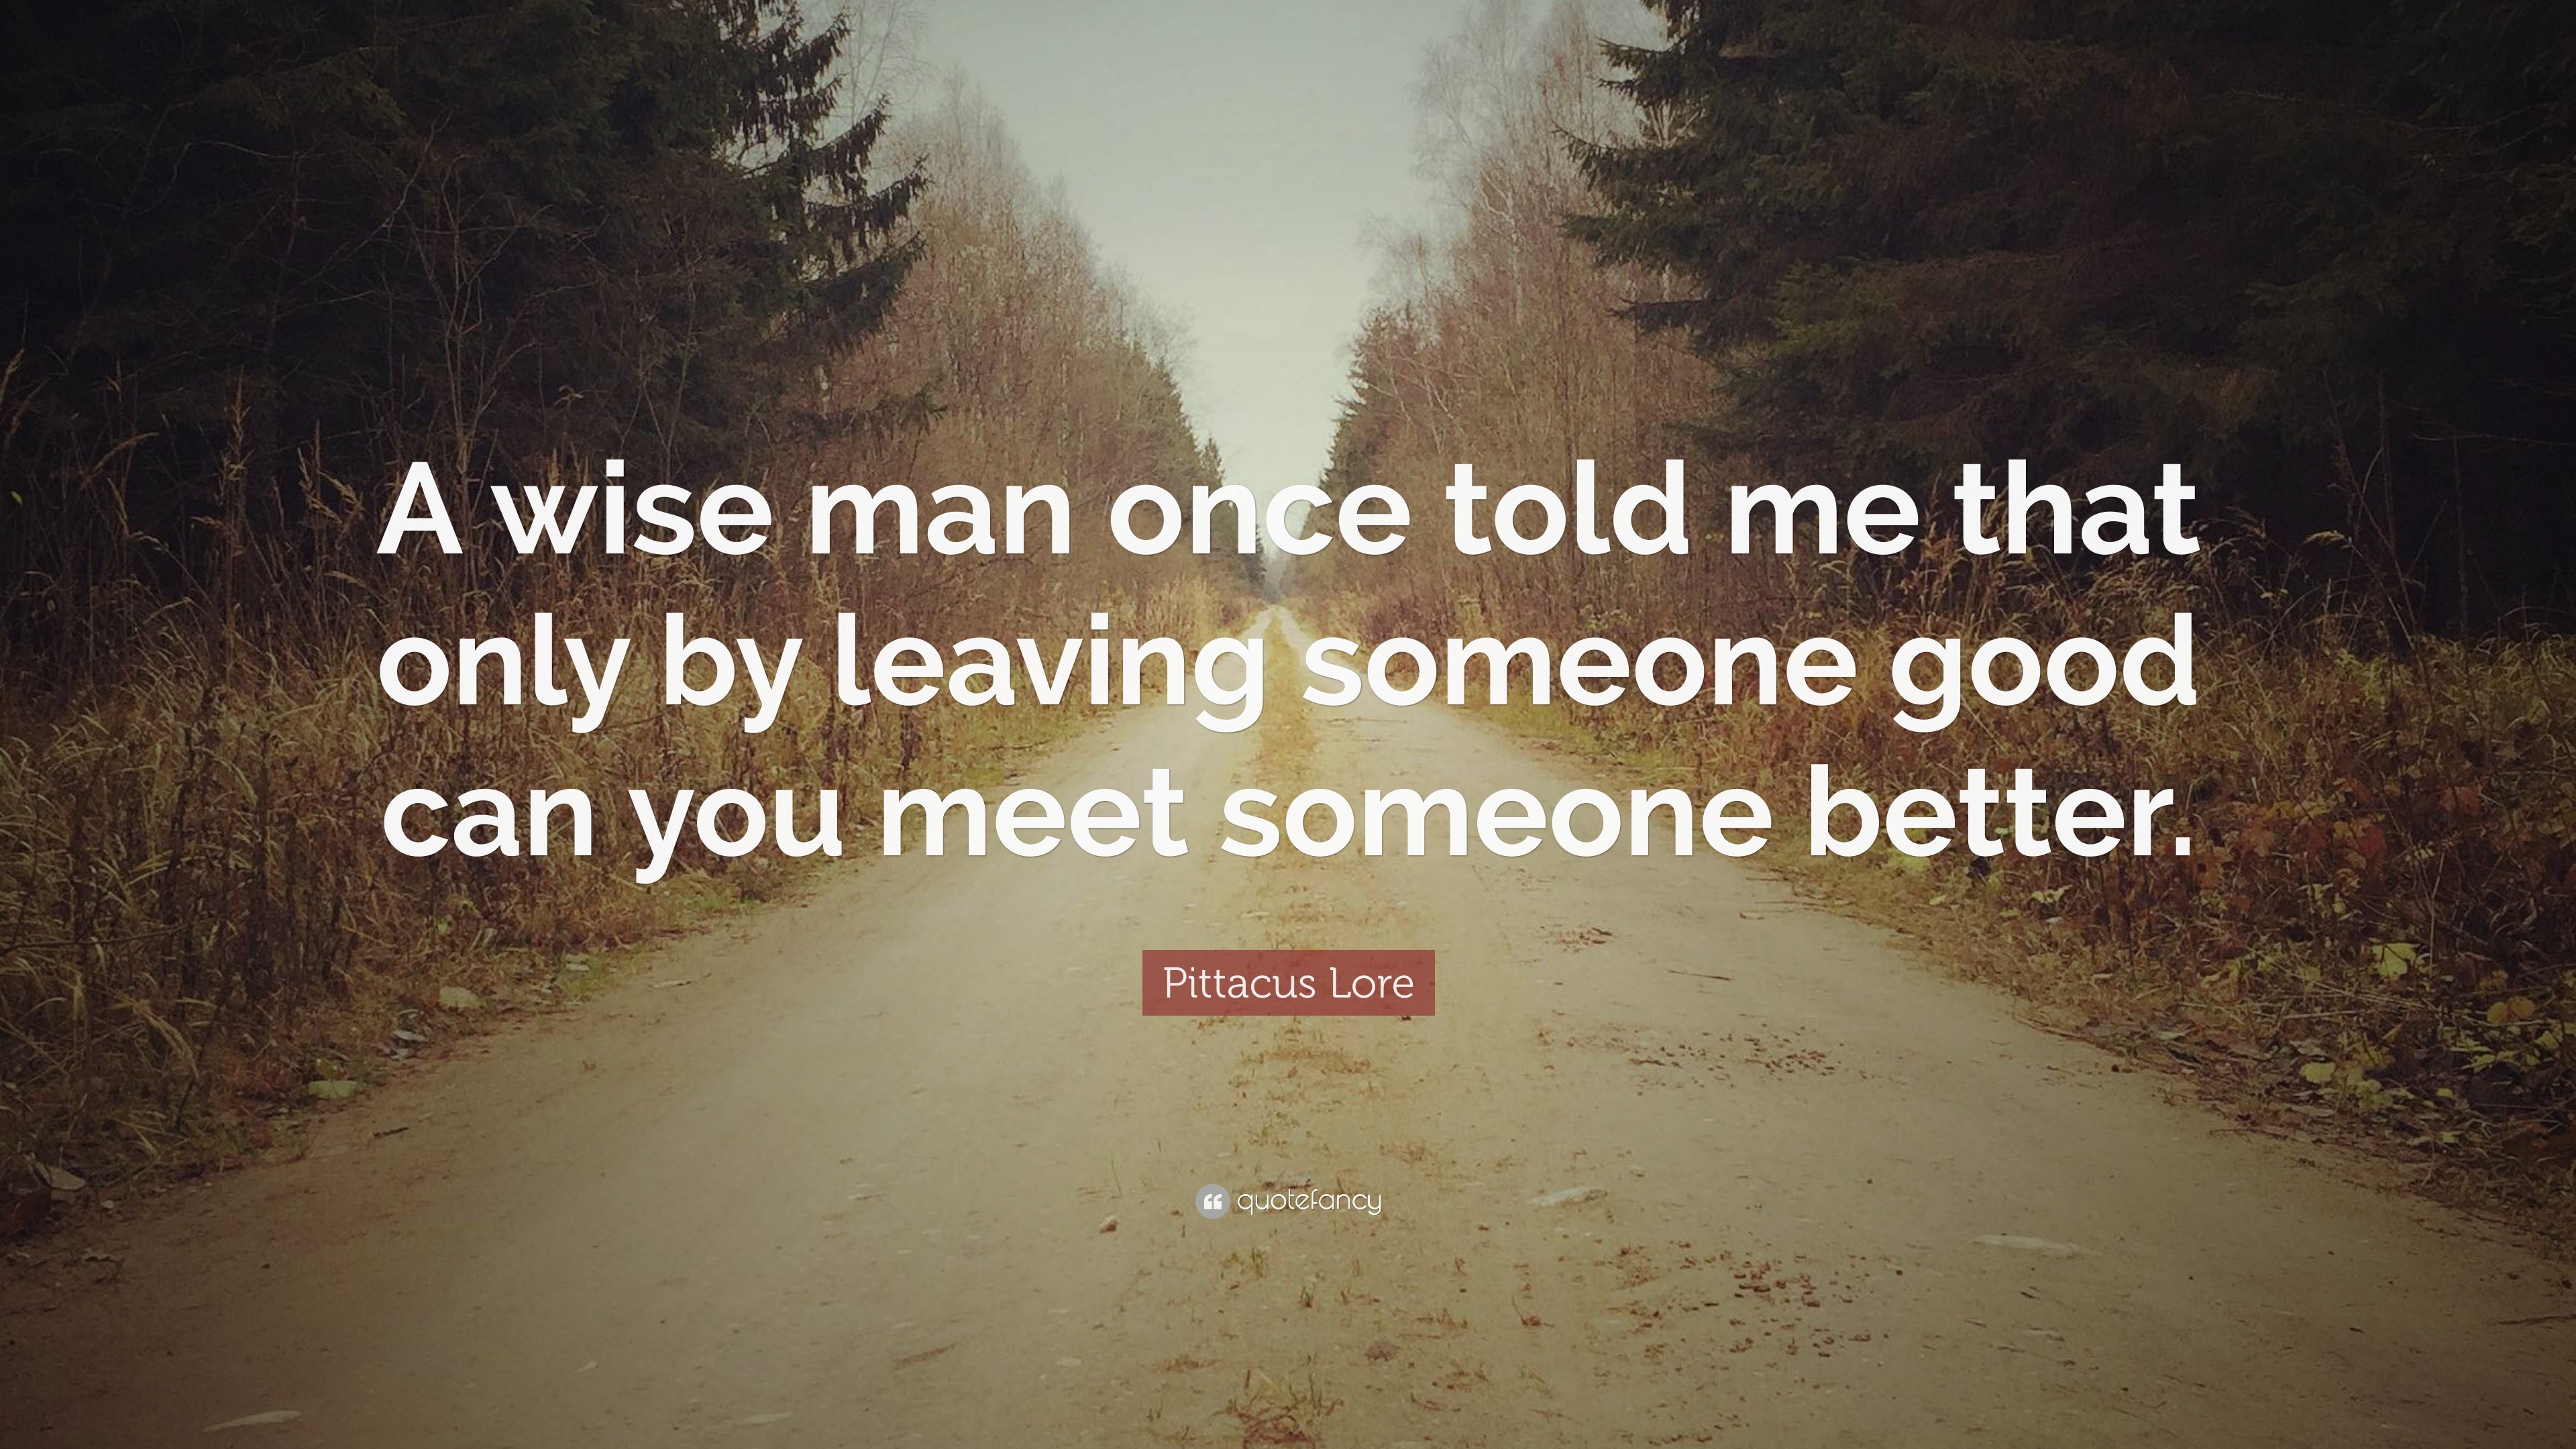 Pittacus Lore Quote “A wise man once told me that only by leaving someone